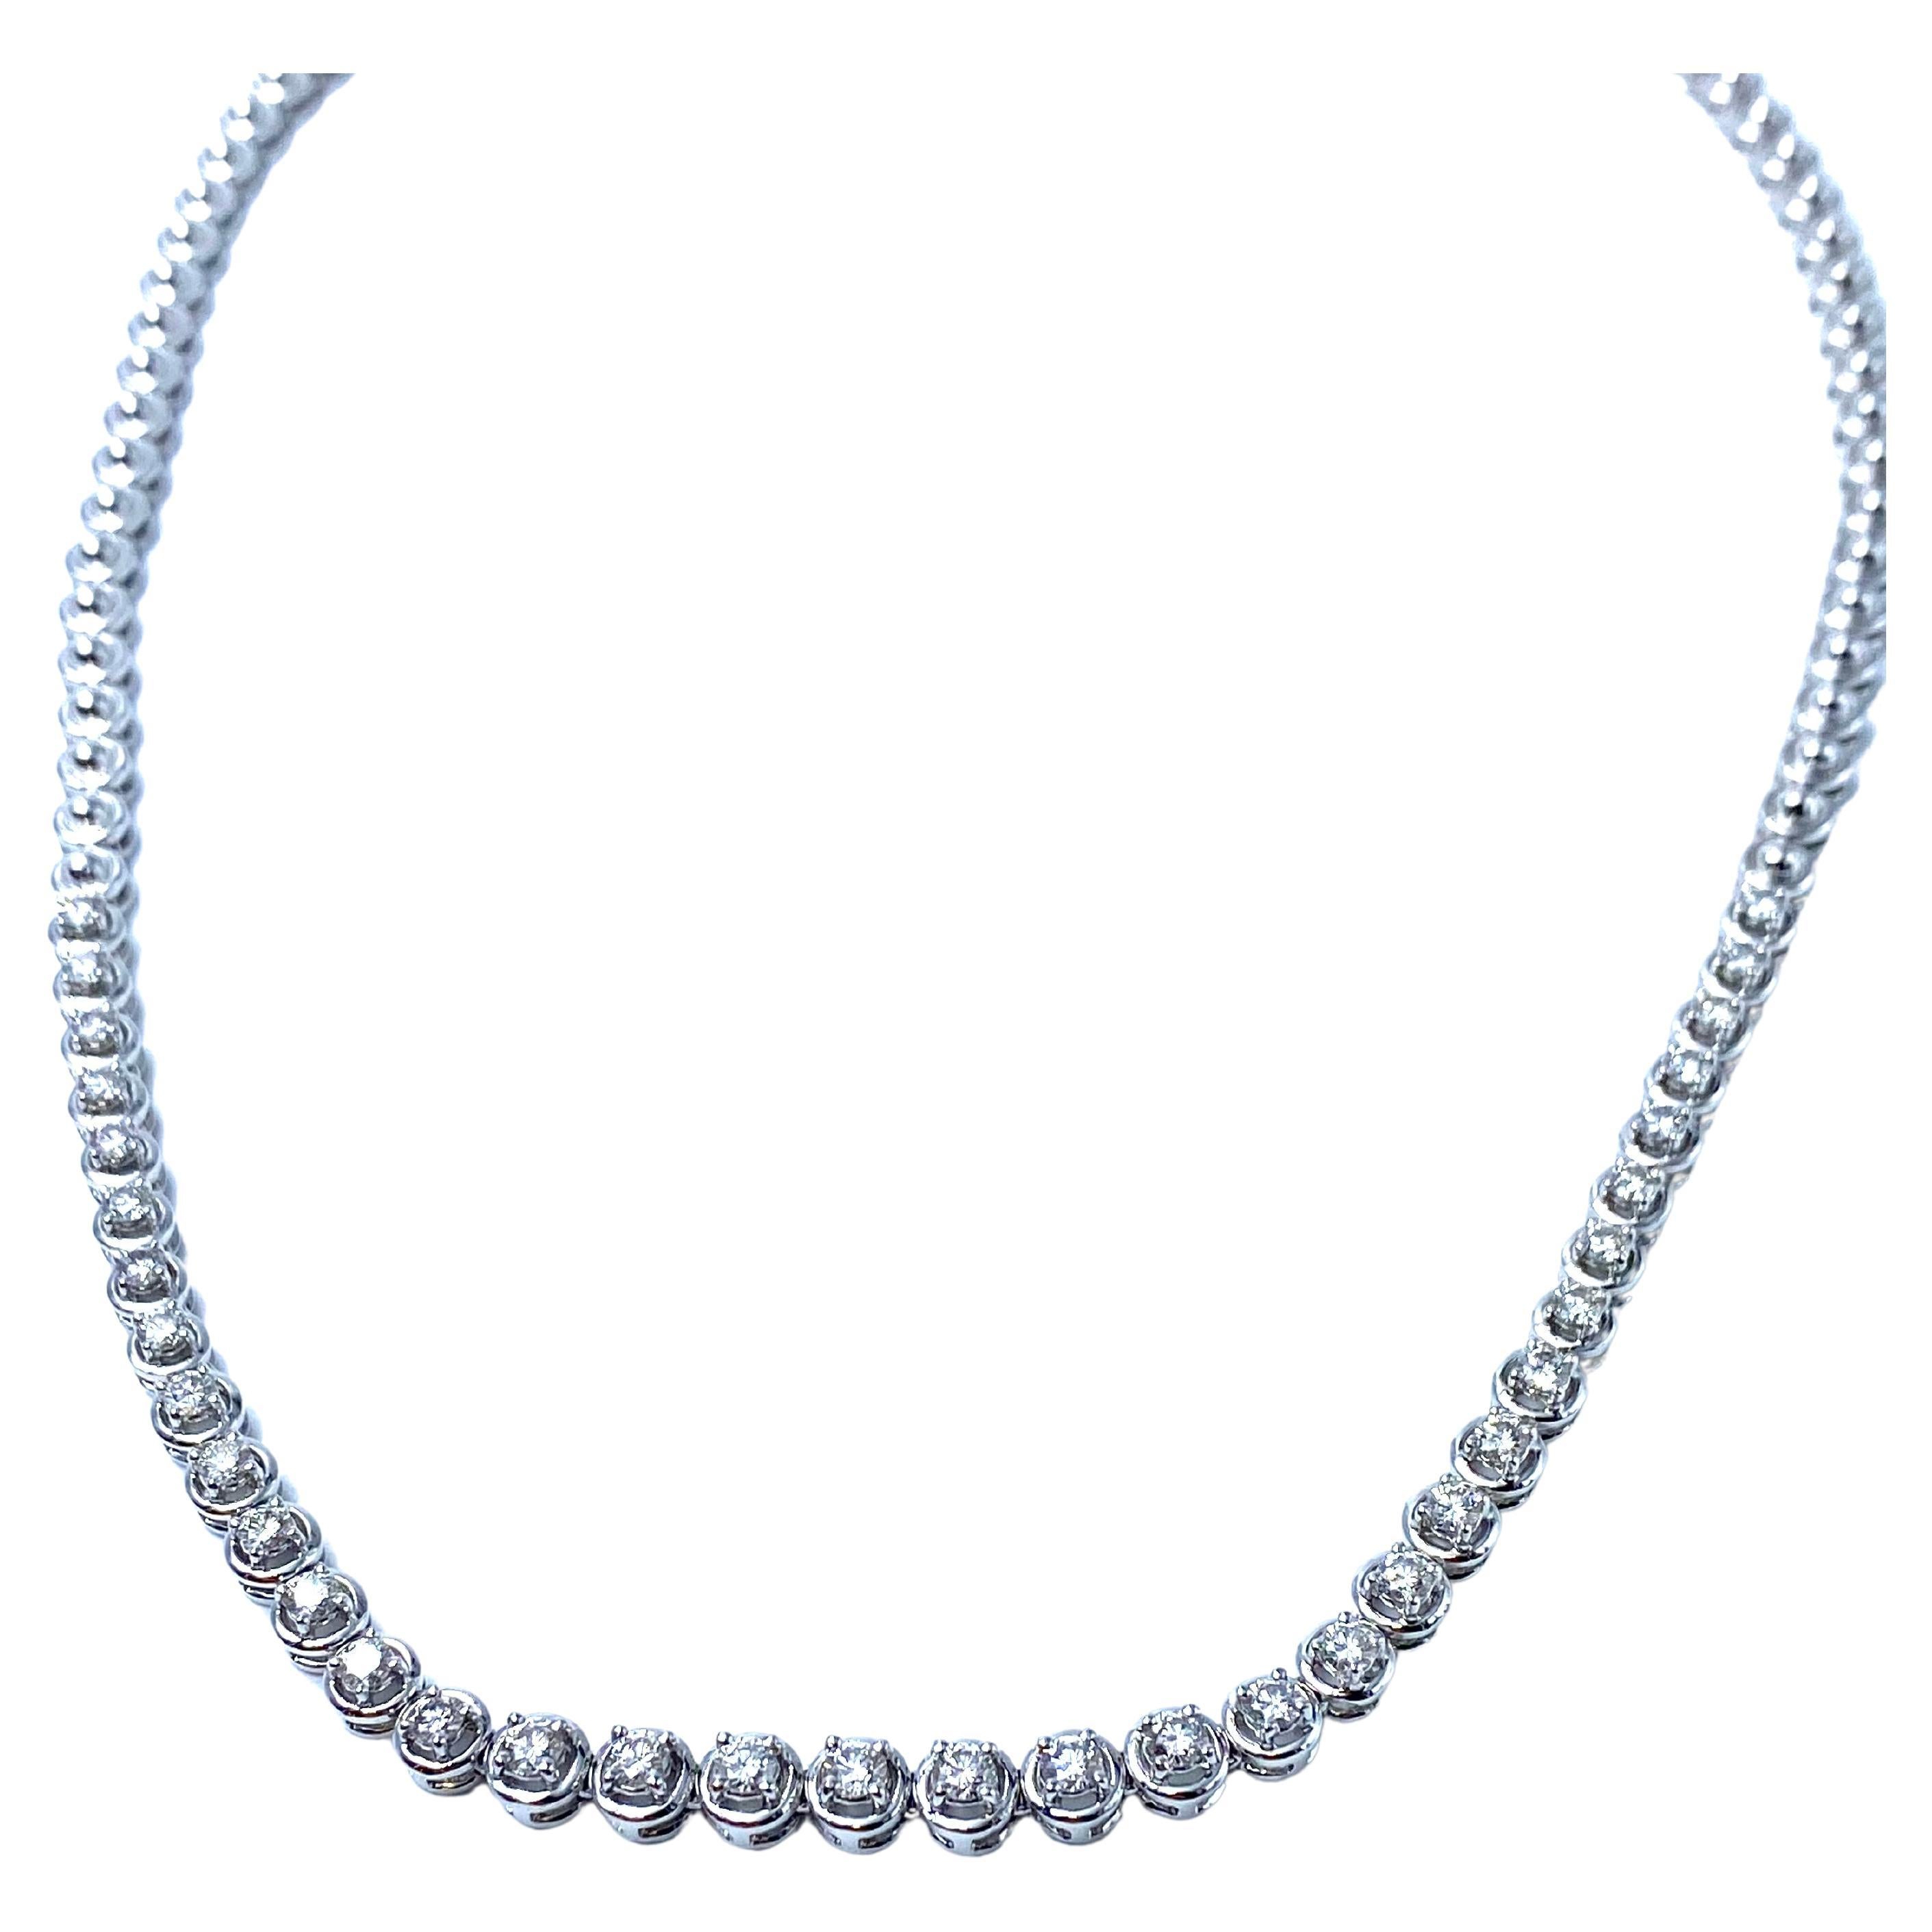 Stunning tennis necklace signed Damiani, Italy.
Crafted in 18K white gold, it mounts 35 brilliant-cut natural diamonds for a total carat weight of over 3.5 ct.
Excellent condition, like new